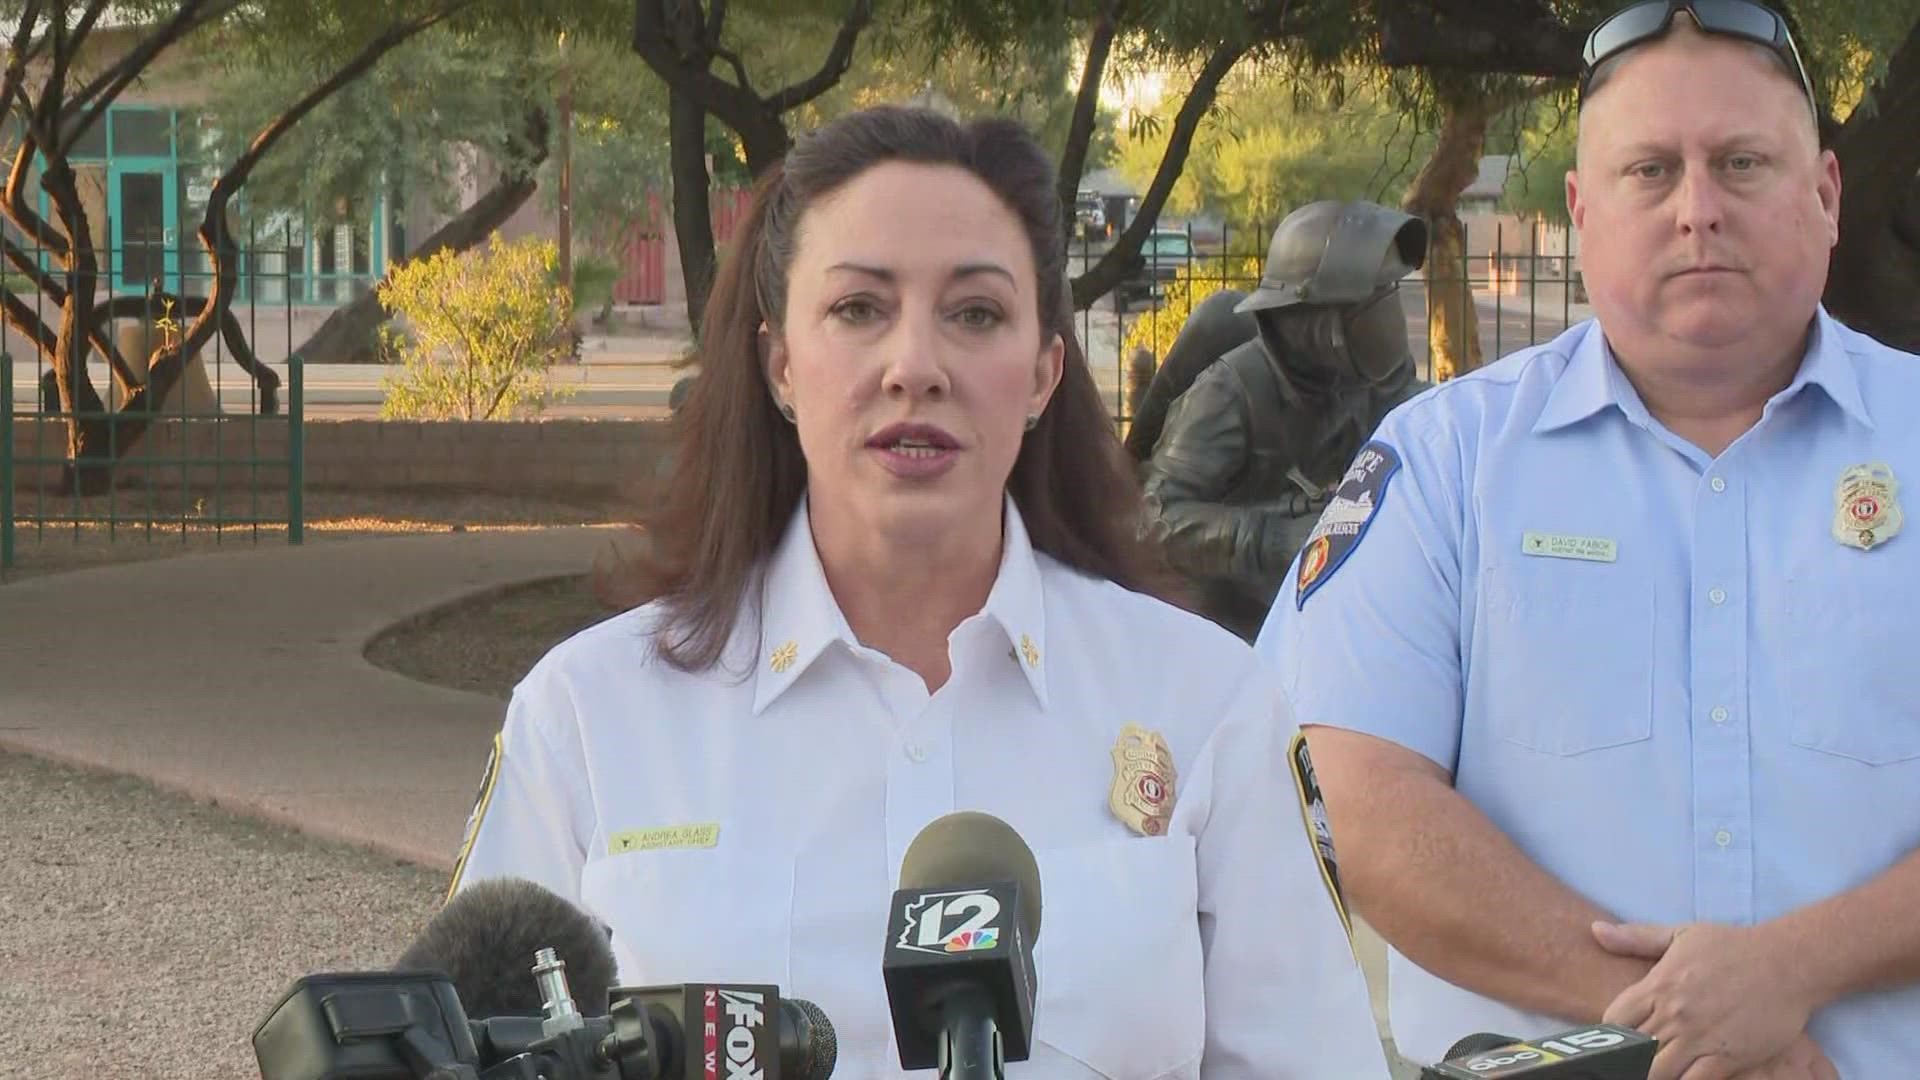 A house fire in Tempe where two bodies were found has been ruled 'not accidental,' officials said. Authorities also added that evidence of accelerants was found.